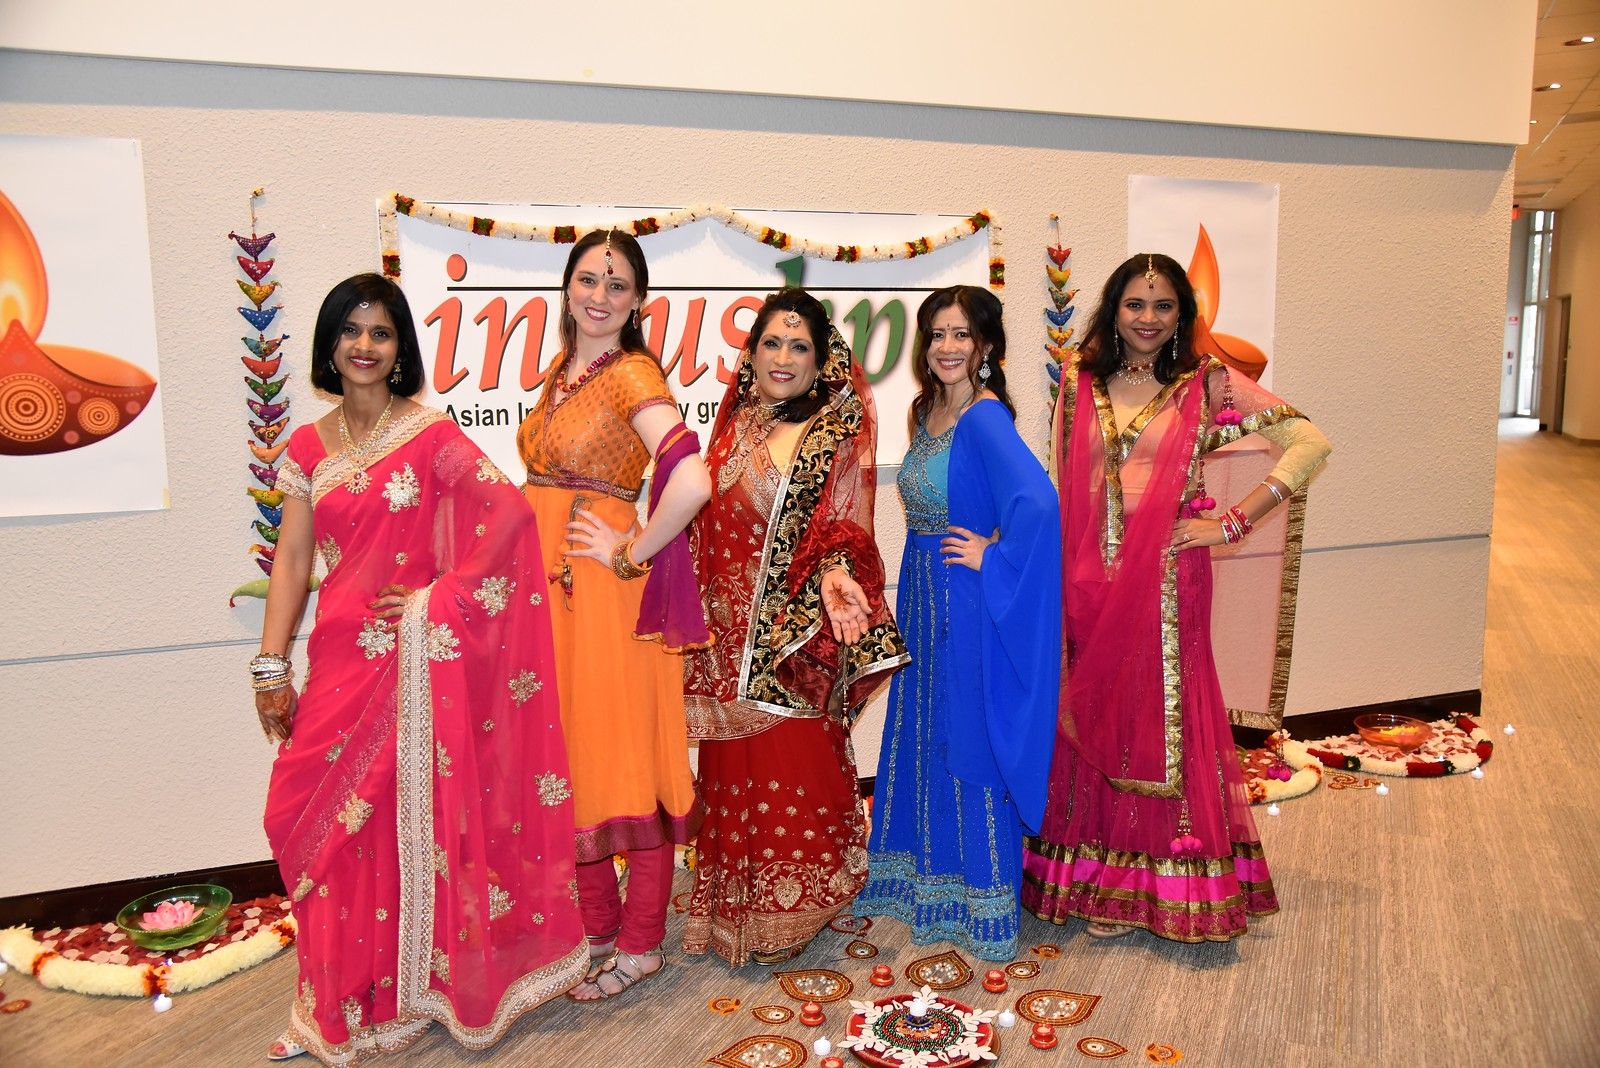 Participants in the Fashion Show not only dressed in beautiful traditional Indian clothing  - they even had a Henna ceremony the night before so our employees could understand this part of the Indian culture